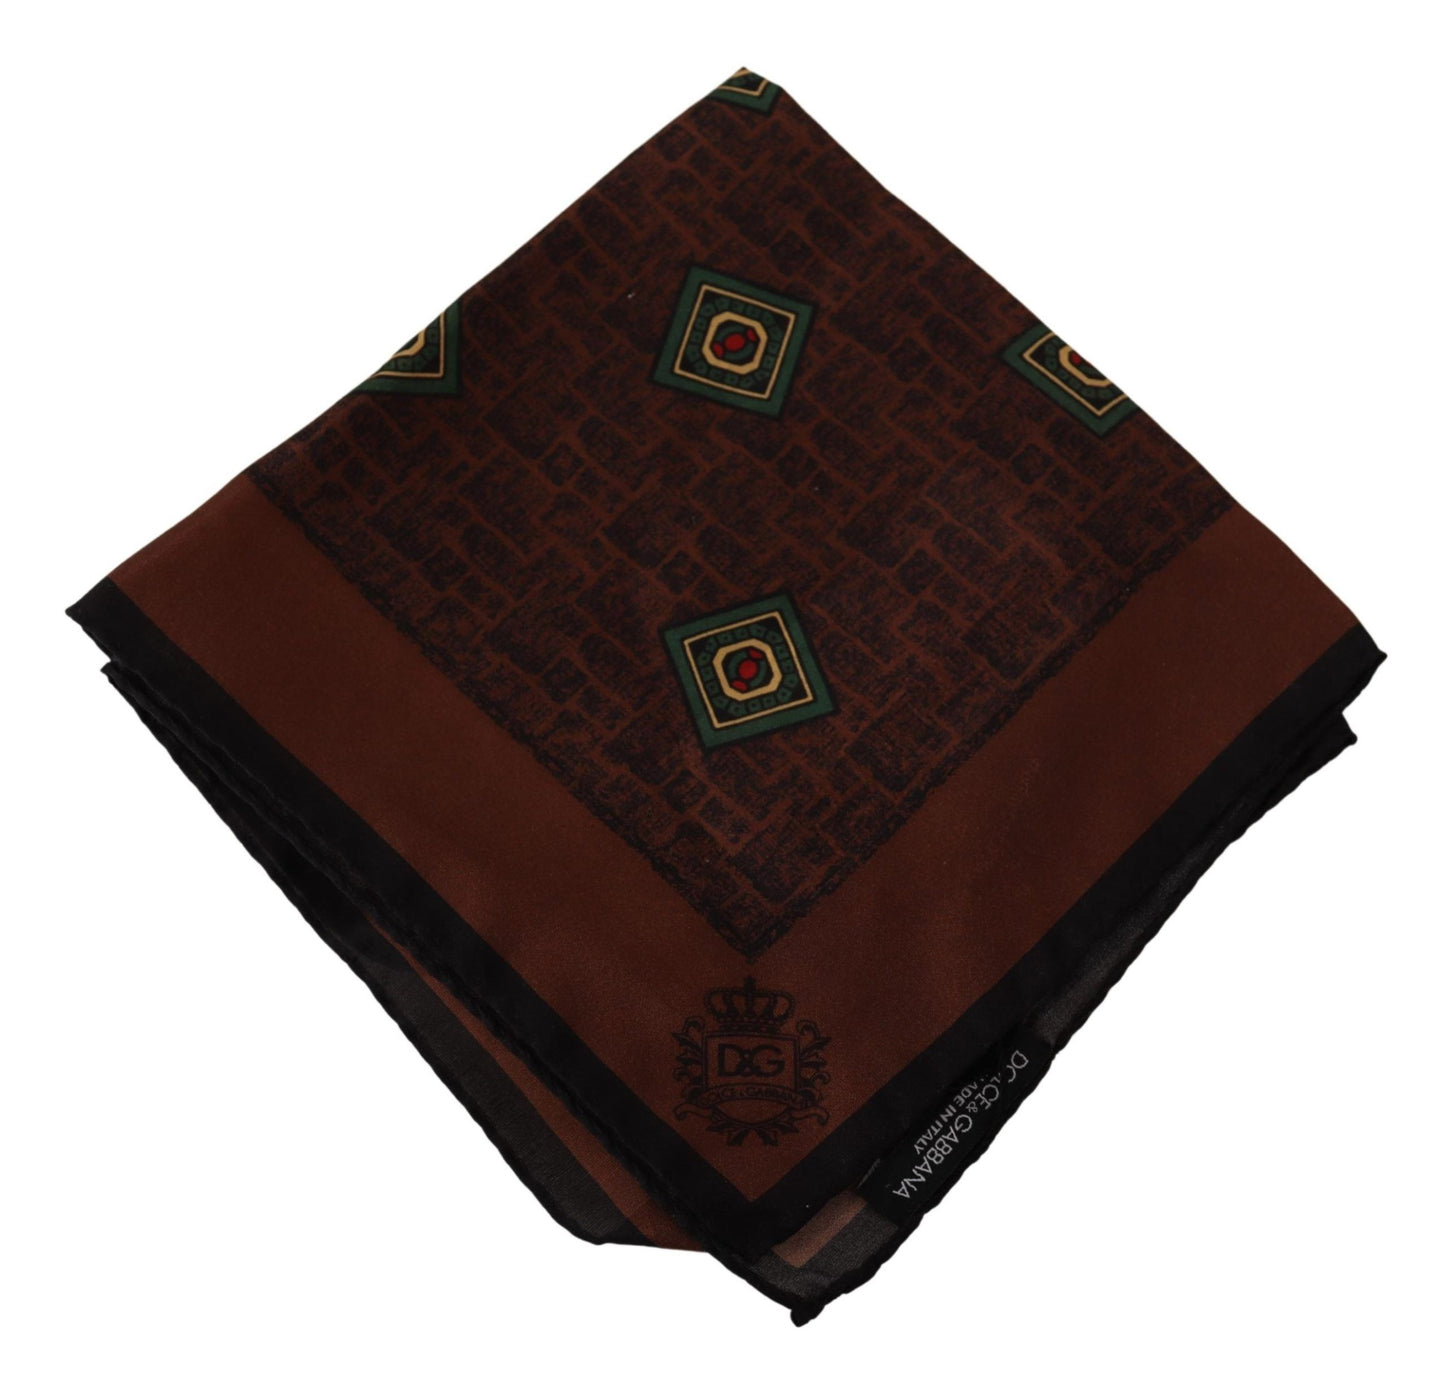 Dolce & Gabbana Brown Patterned Silk Square Handkerchief Scarf